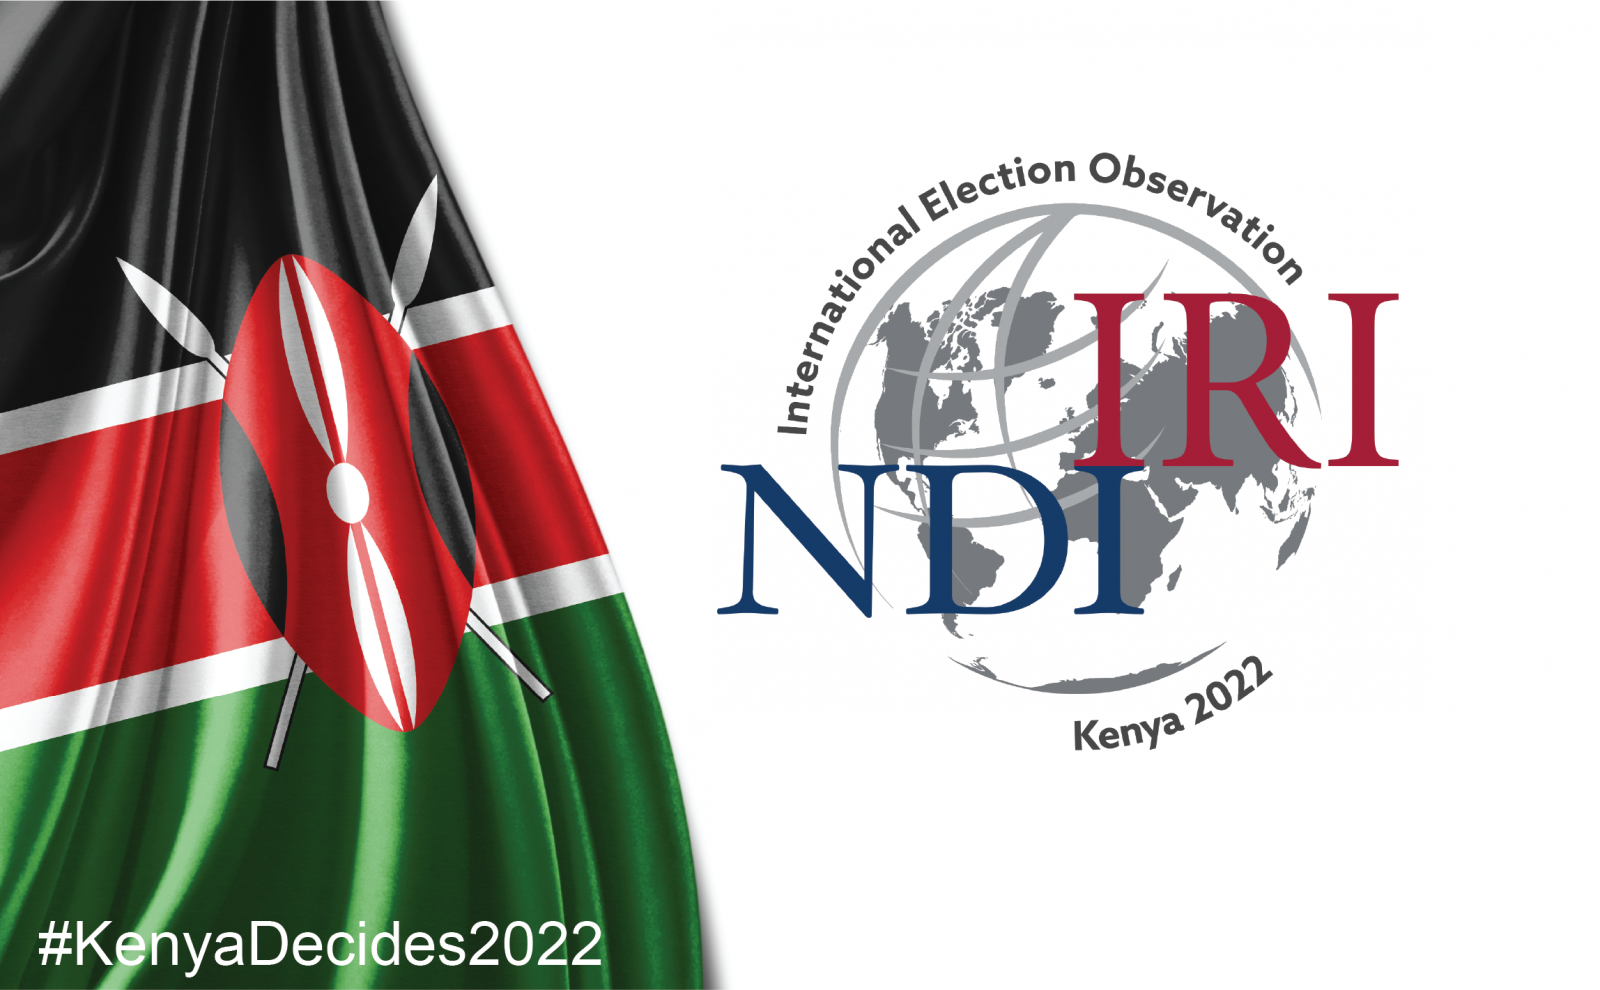 International Mission to Observe the August 9 General Elections in Kenya